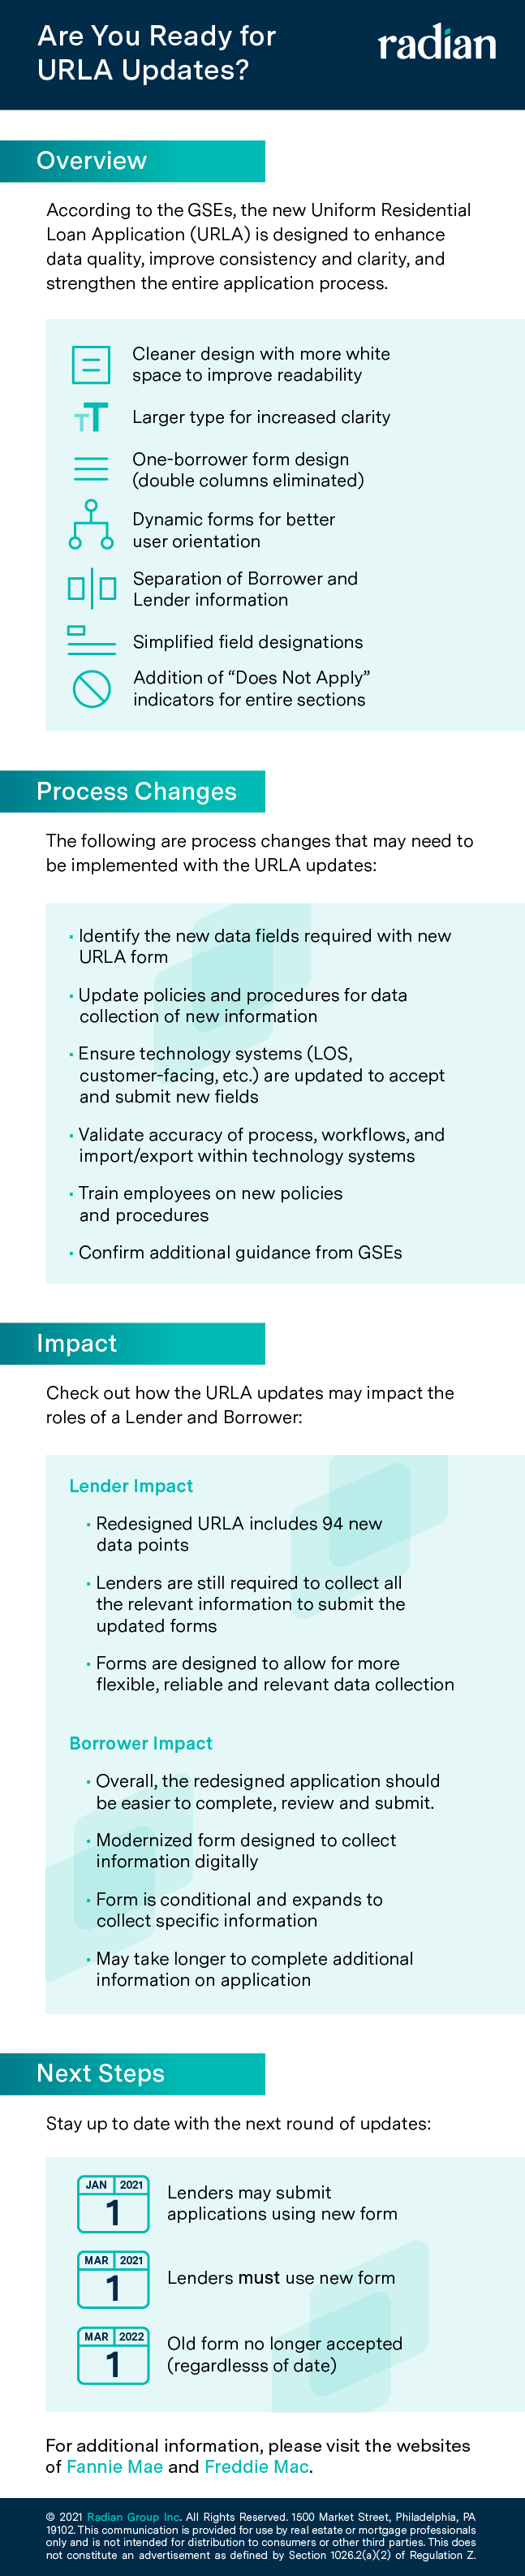 Are you ready for URLA updates?